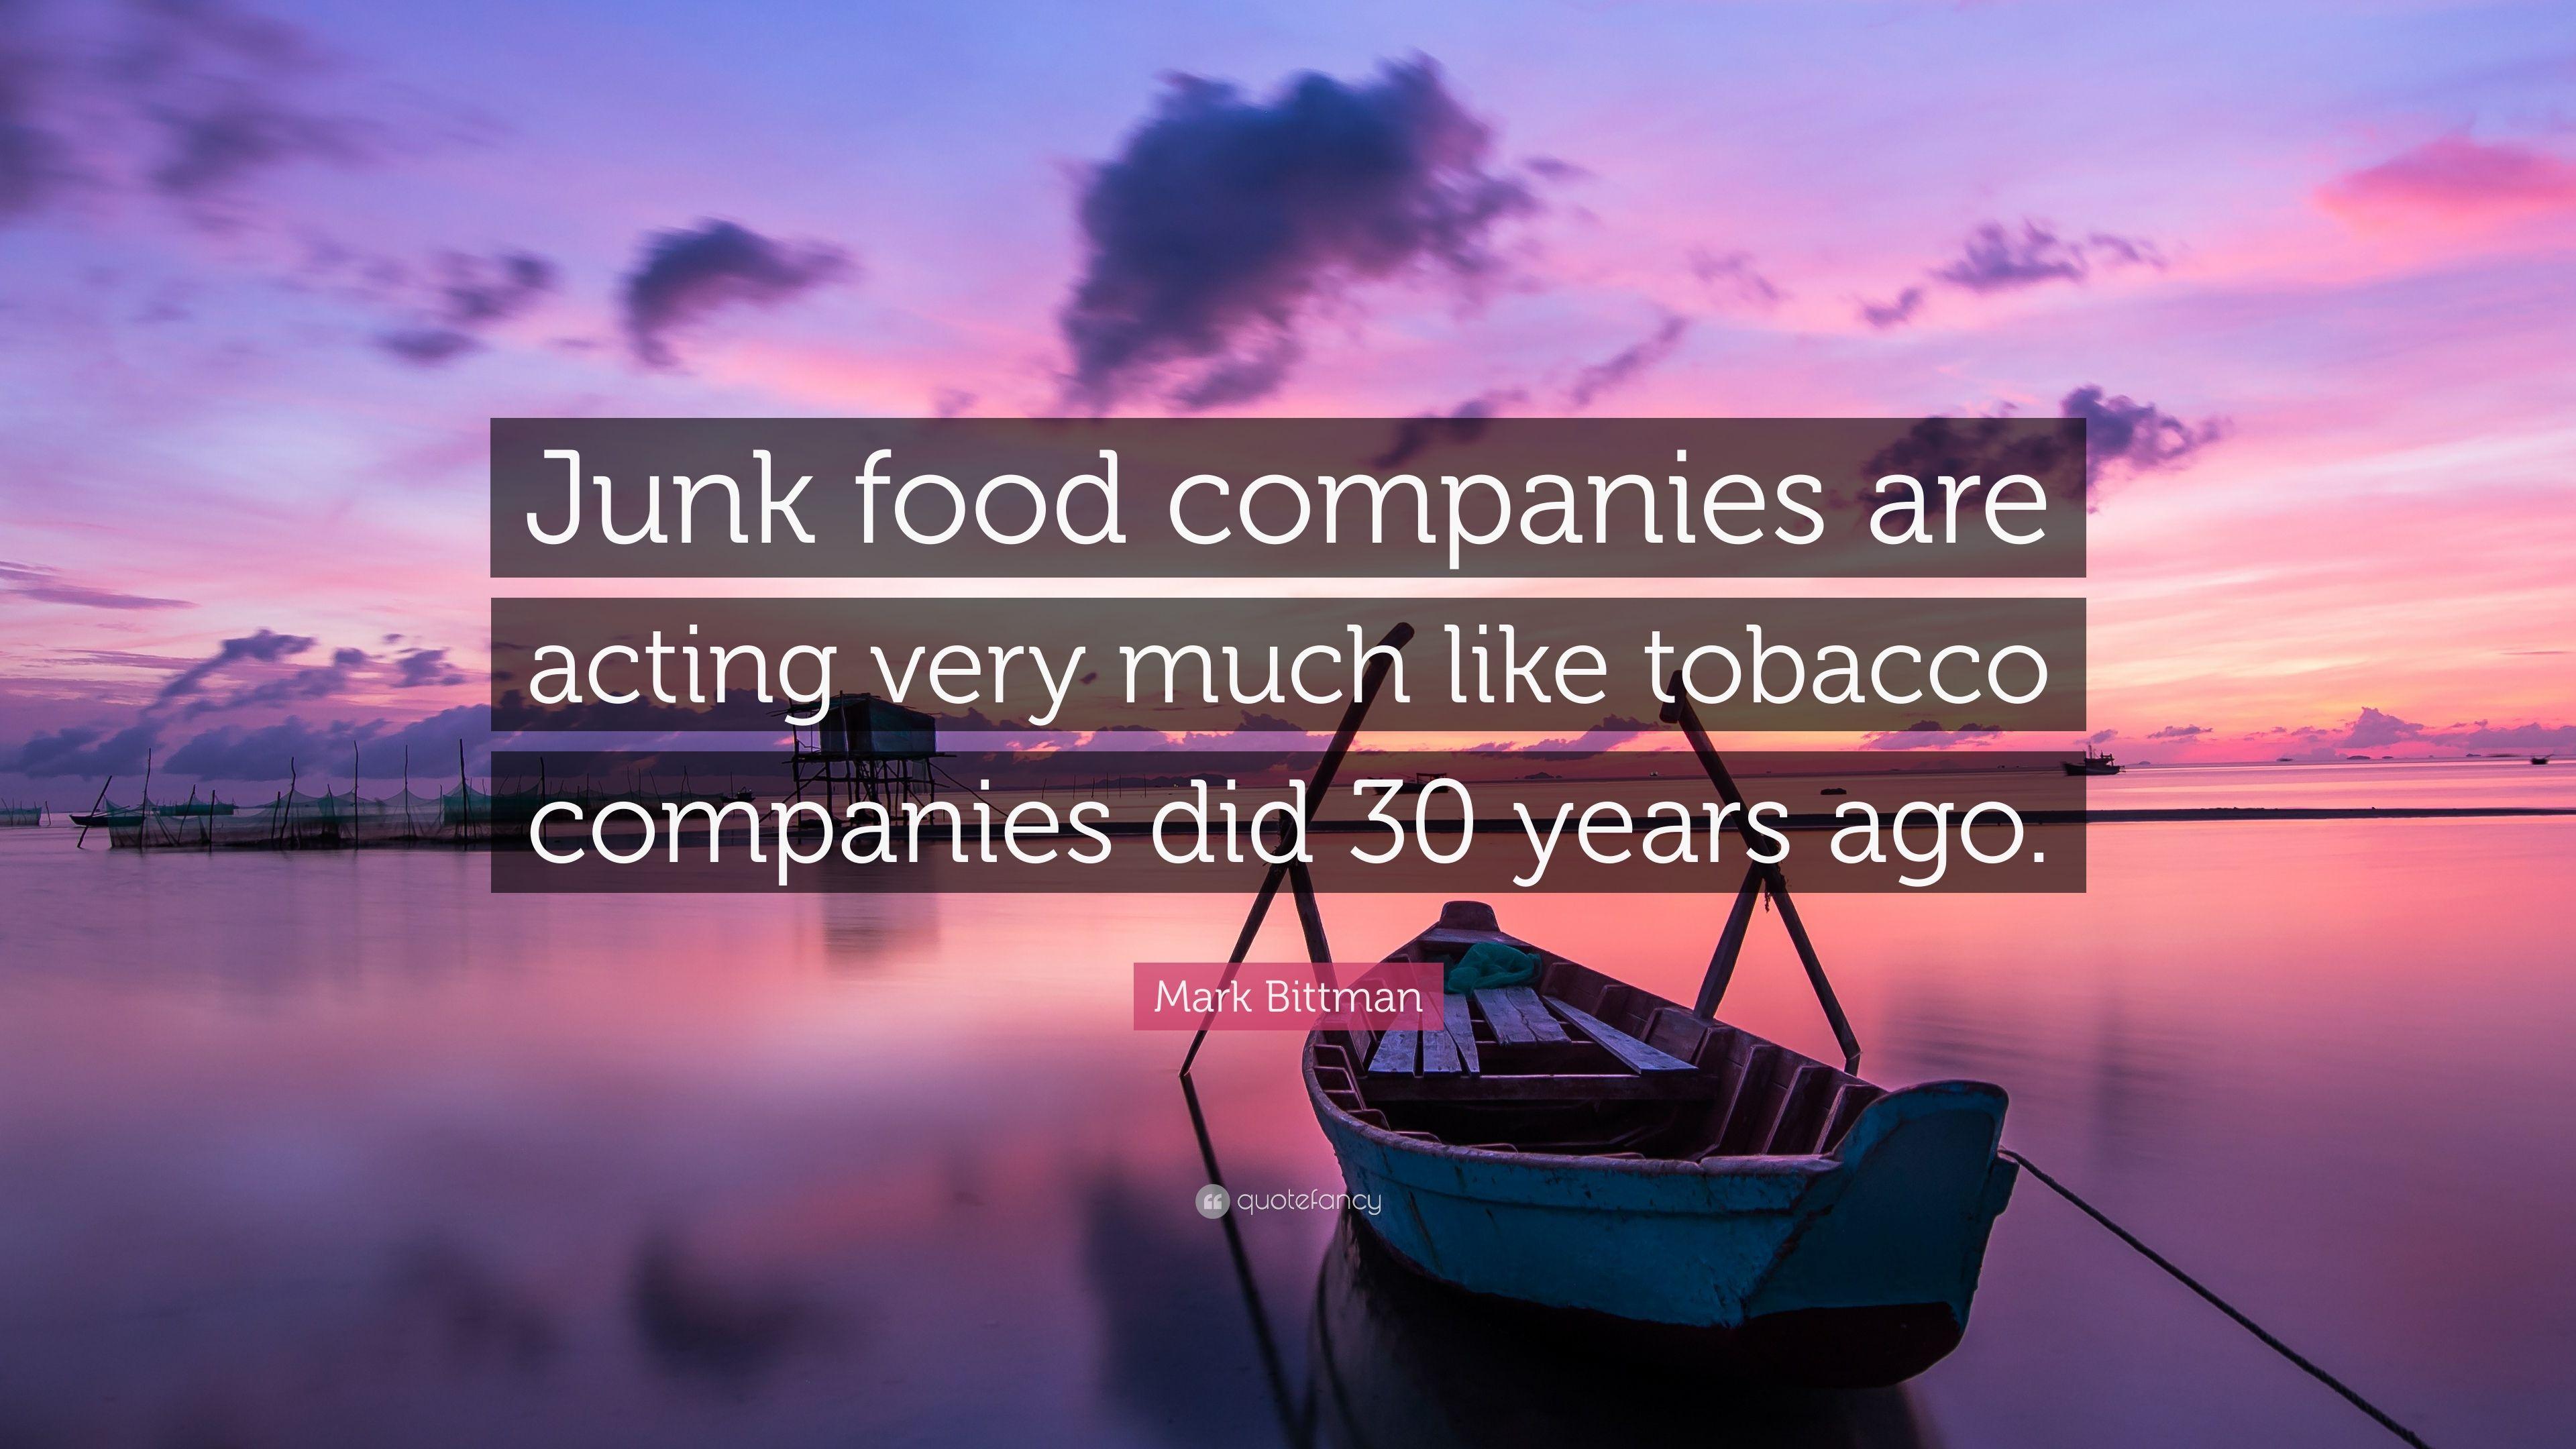 Mark Bittman Quote: “Junk food companies are acting very much like